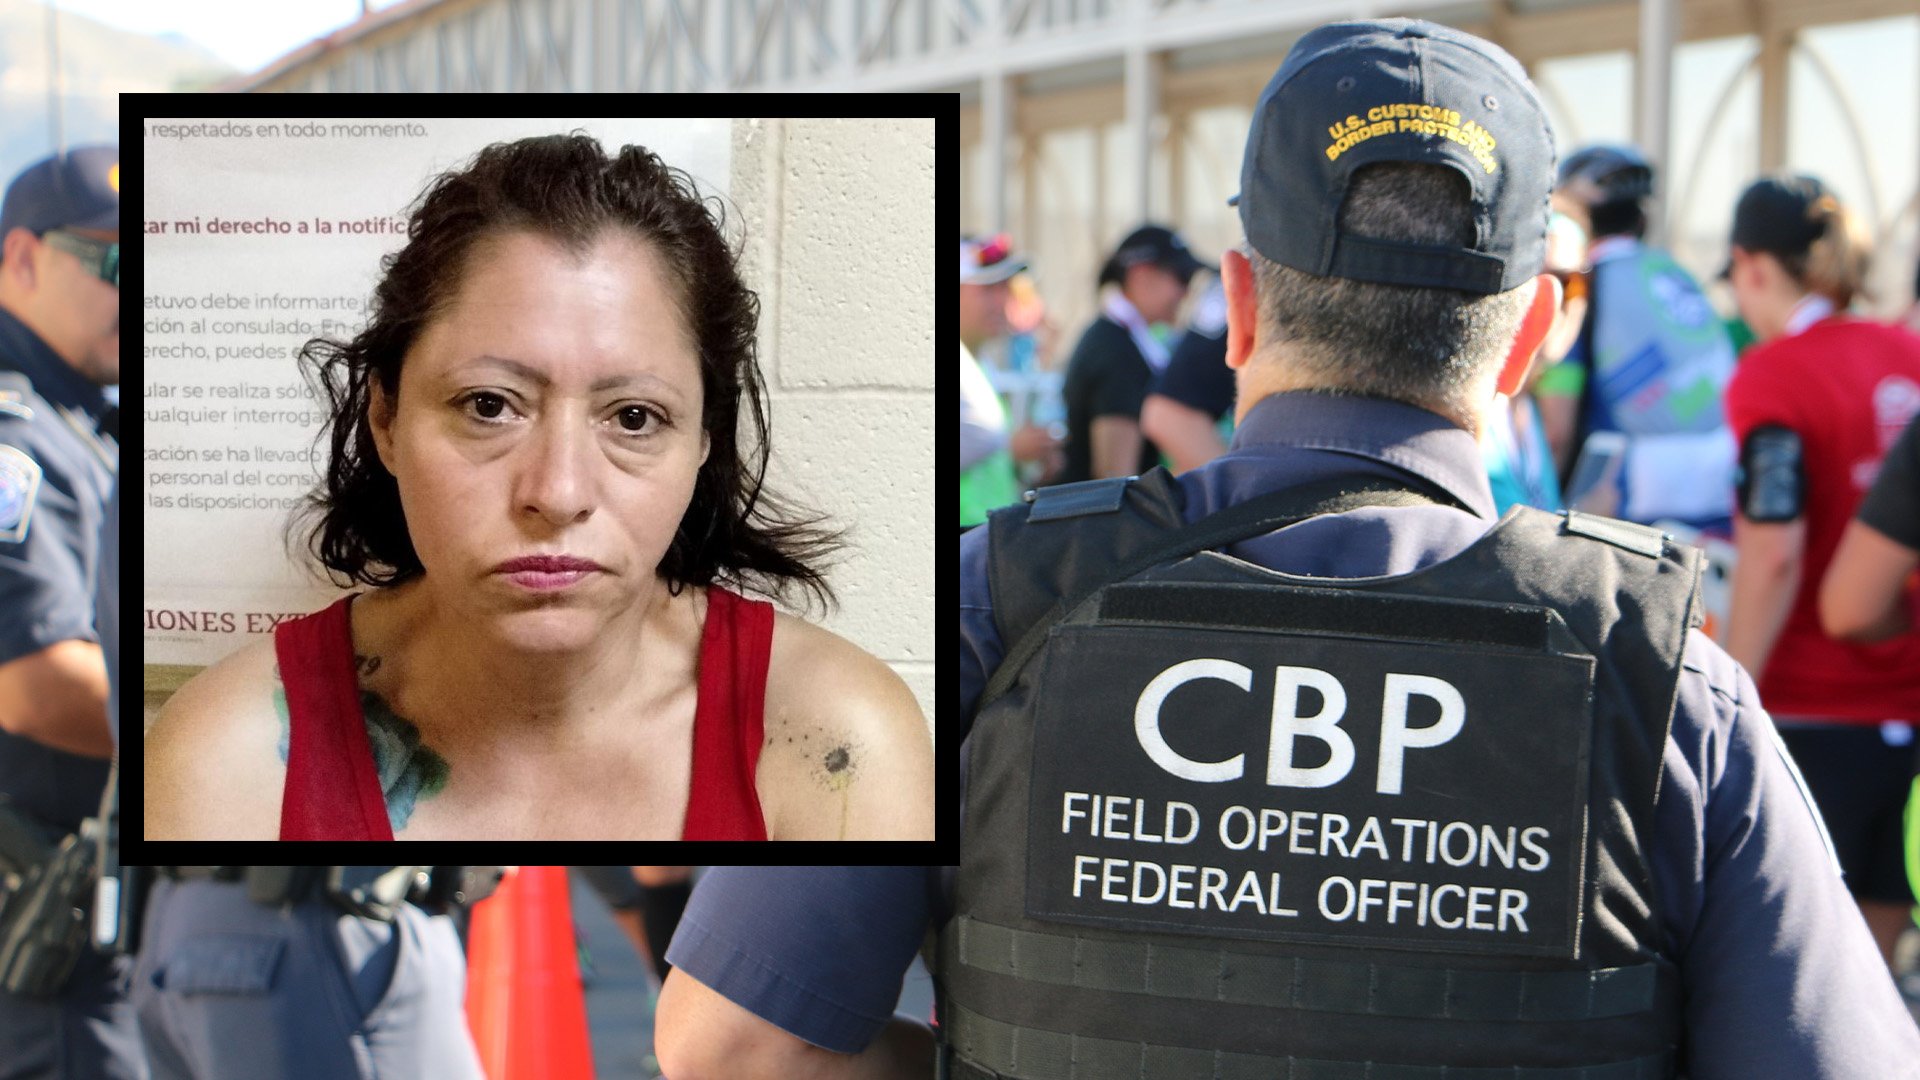 Murder suspect Gloria Villa Avila, 41, was taken into custody on Monday, Aug. 29, 2022, at the international border with Mexico. An indictment alleges she killed Ismael Rodriguez, 44, in September of 2019 in Nashville, Tennessee. Coffee or Die Magazine composite.